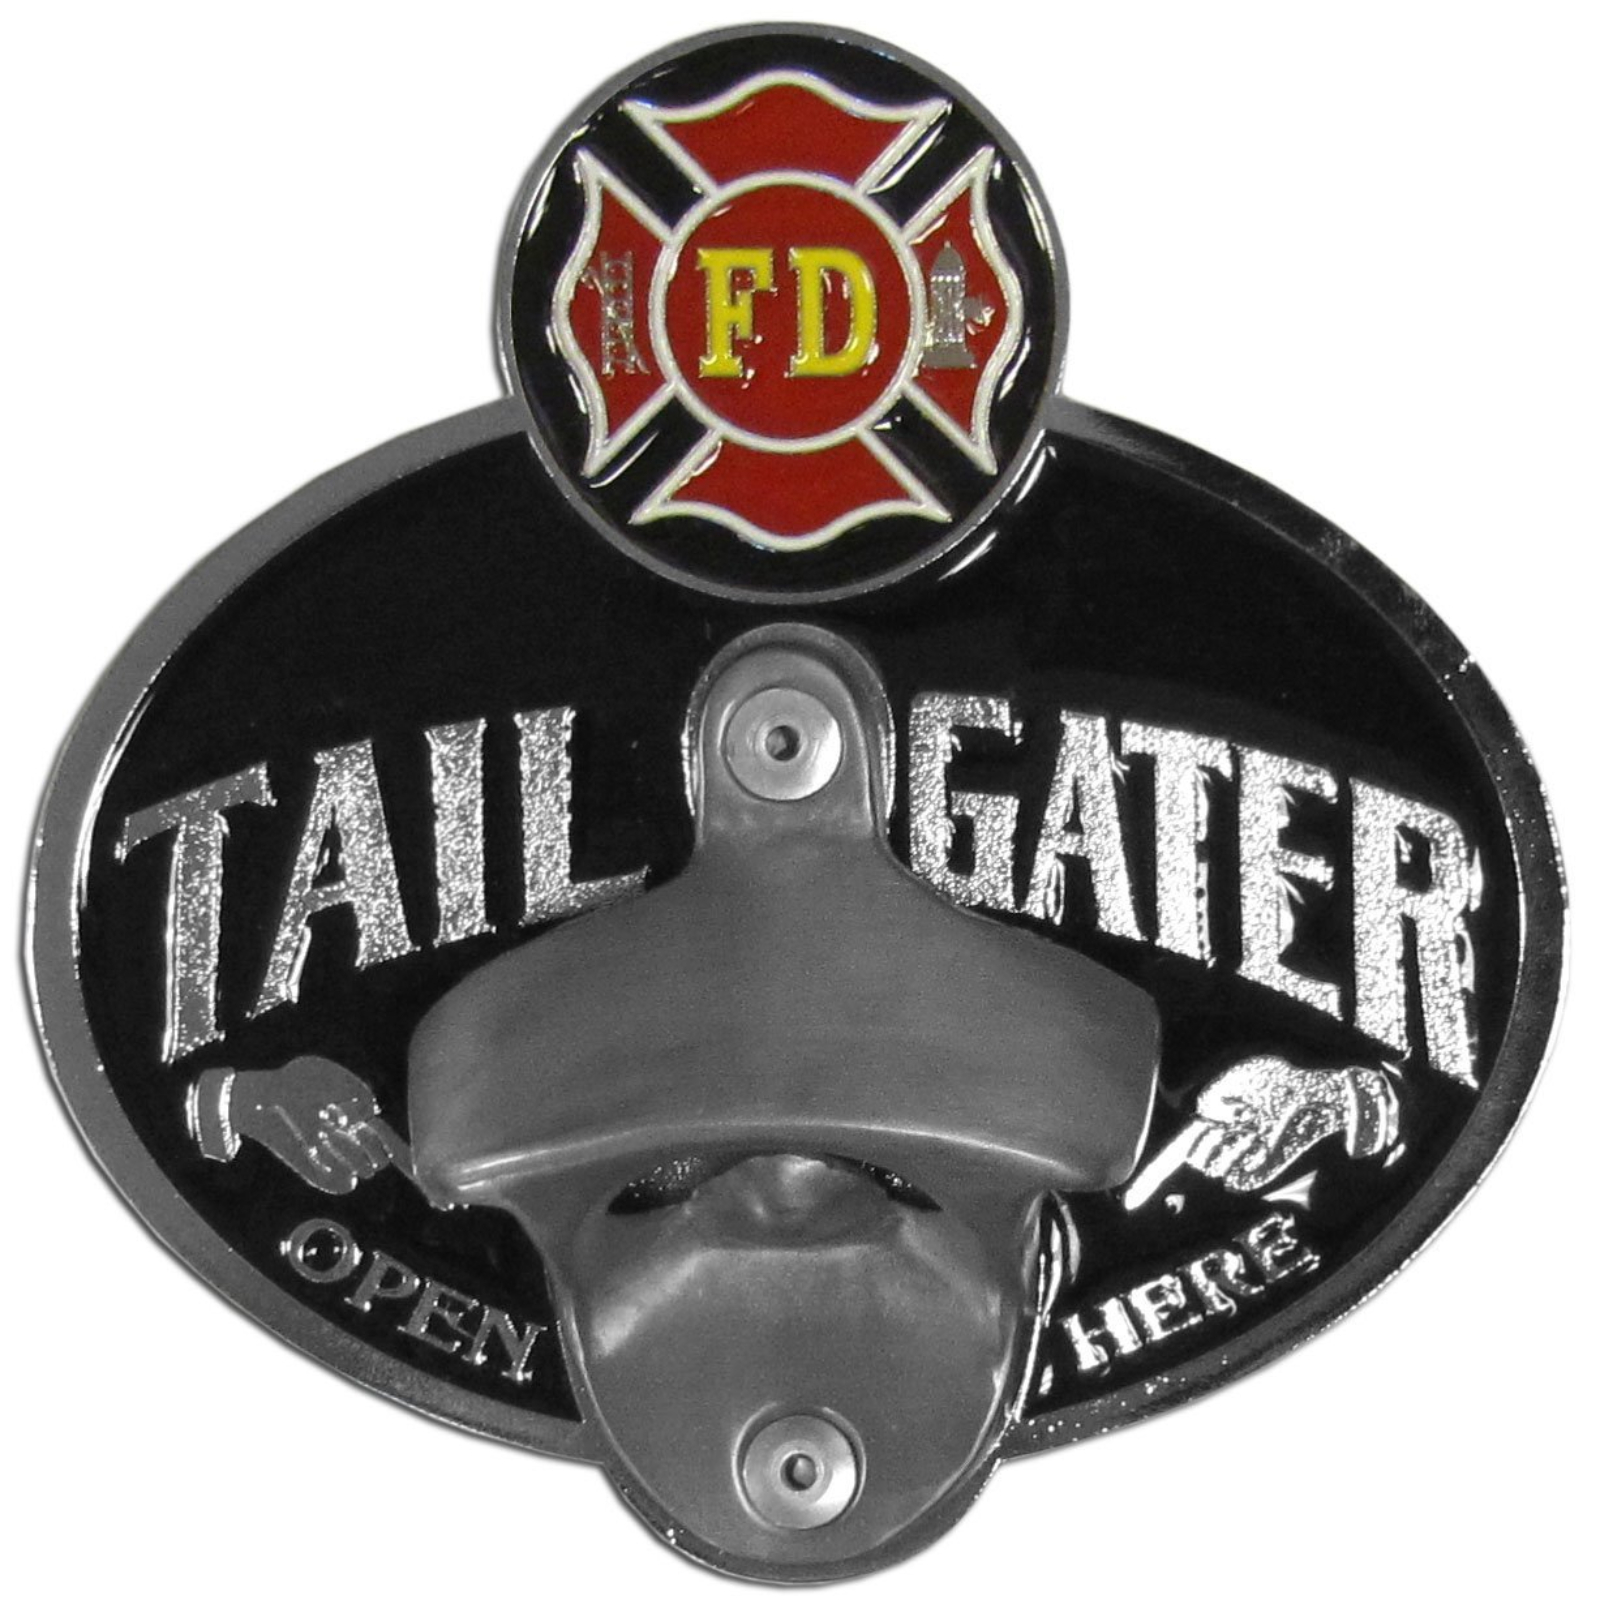 Firefighter Tailgater Hitch Cover